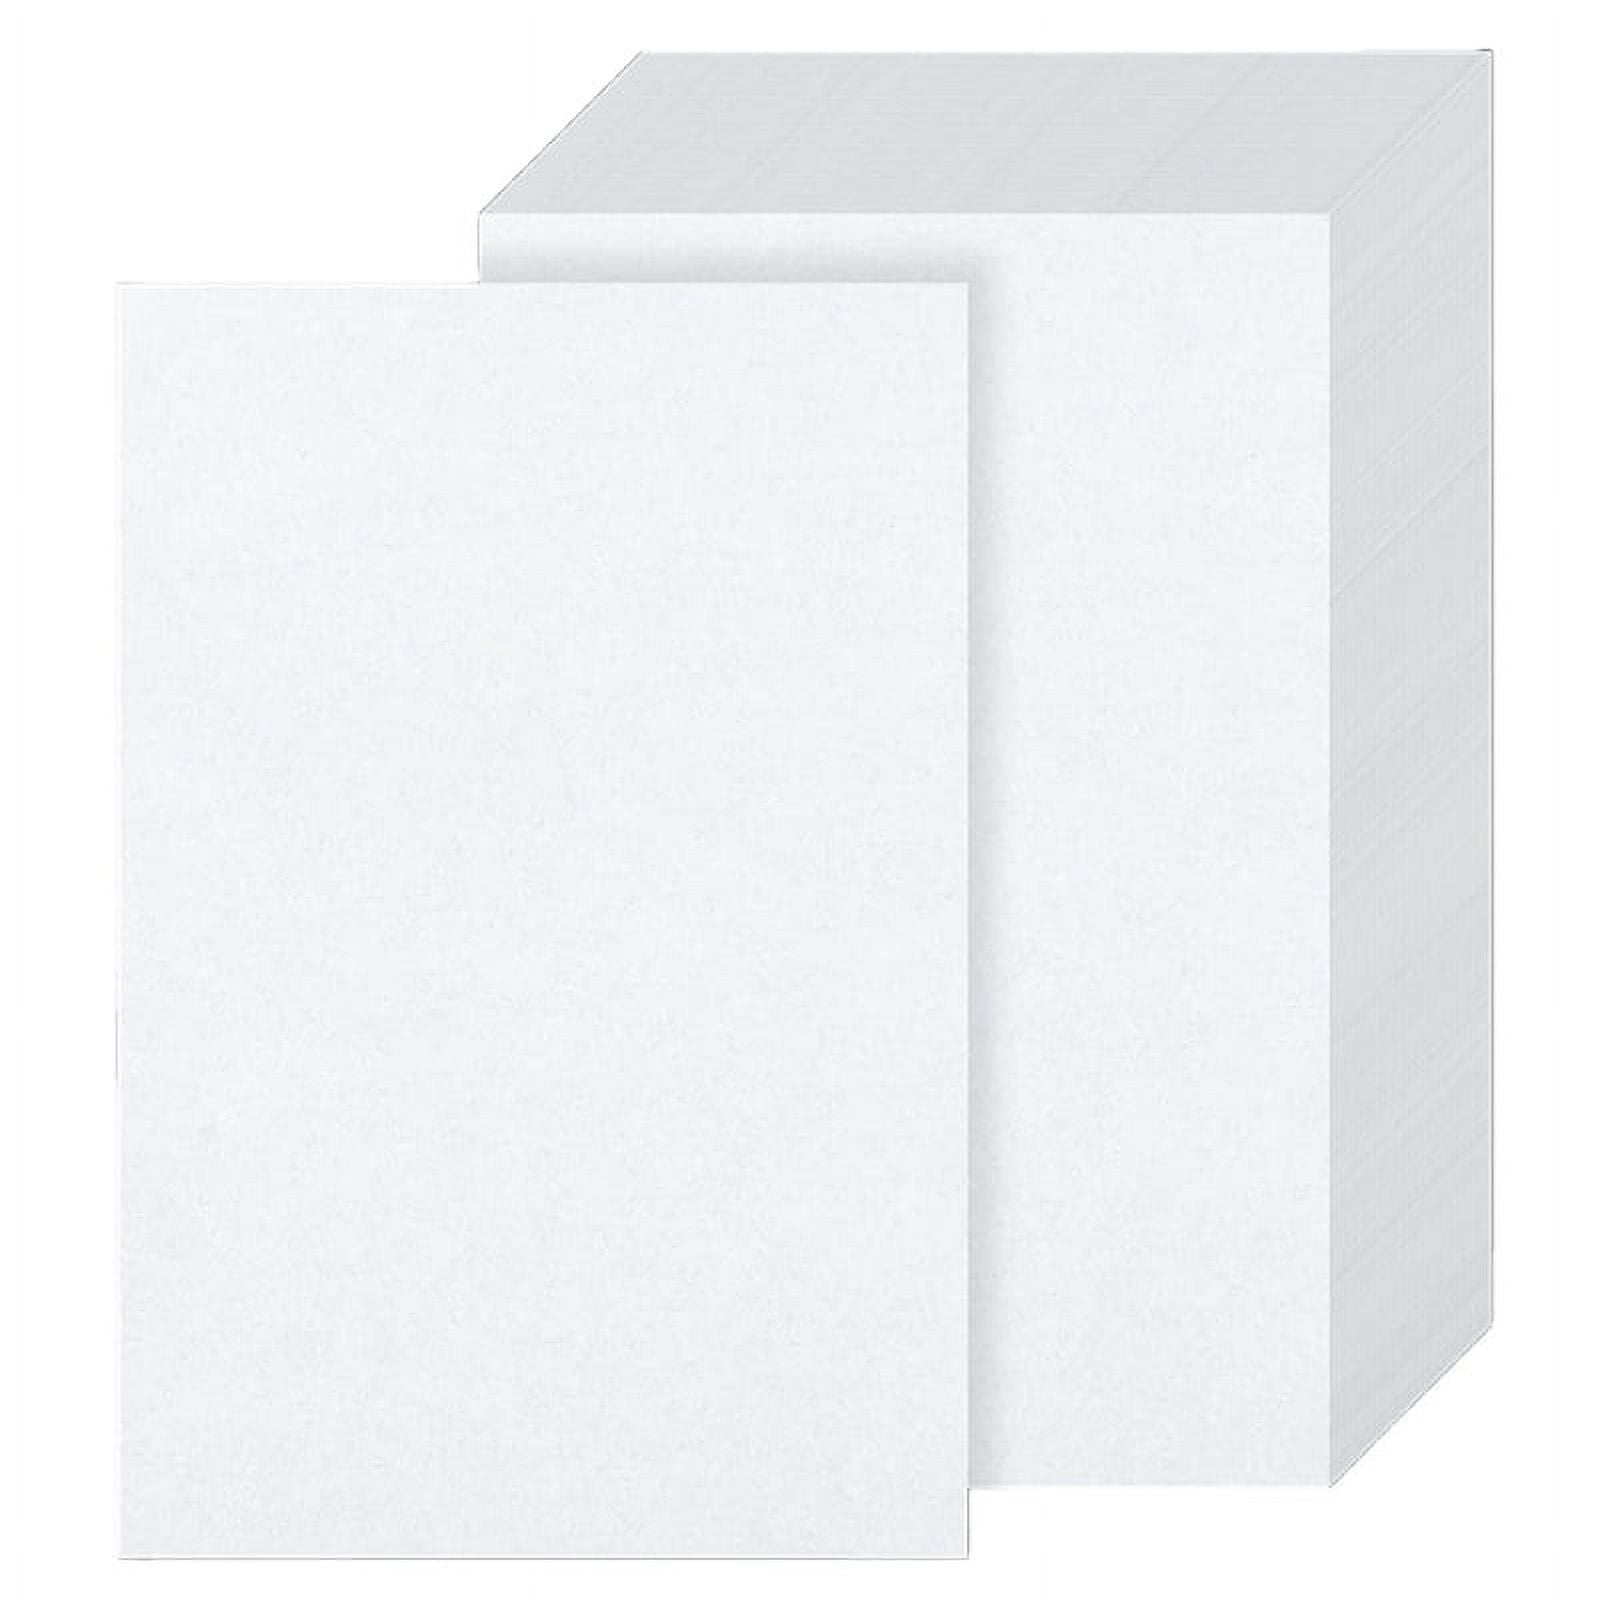 200 Pieces Release Paper 16x12cm Double-Sided Release Paper Non-Stick Diamondpainting Cover Replacement Paper, White